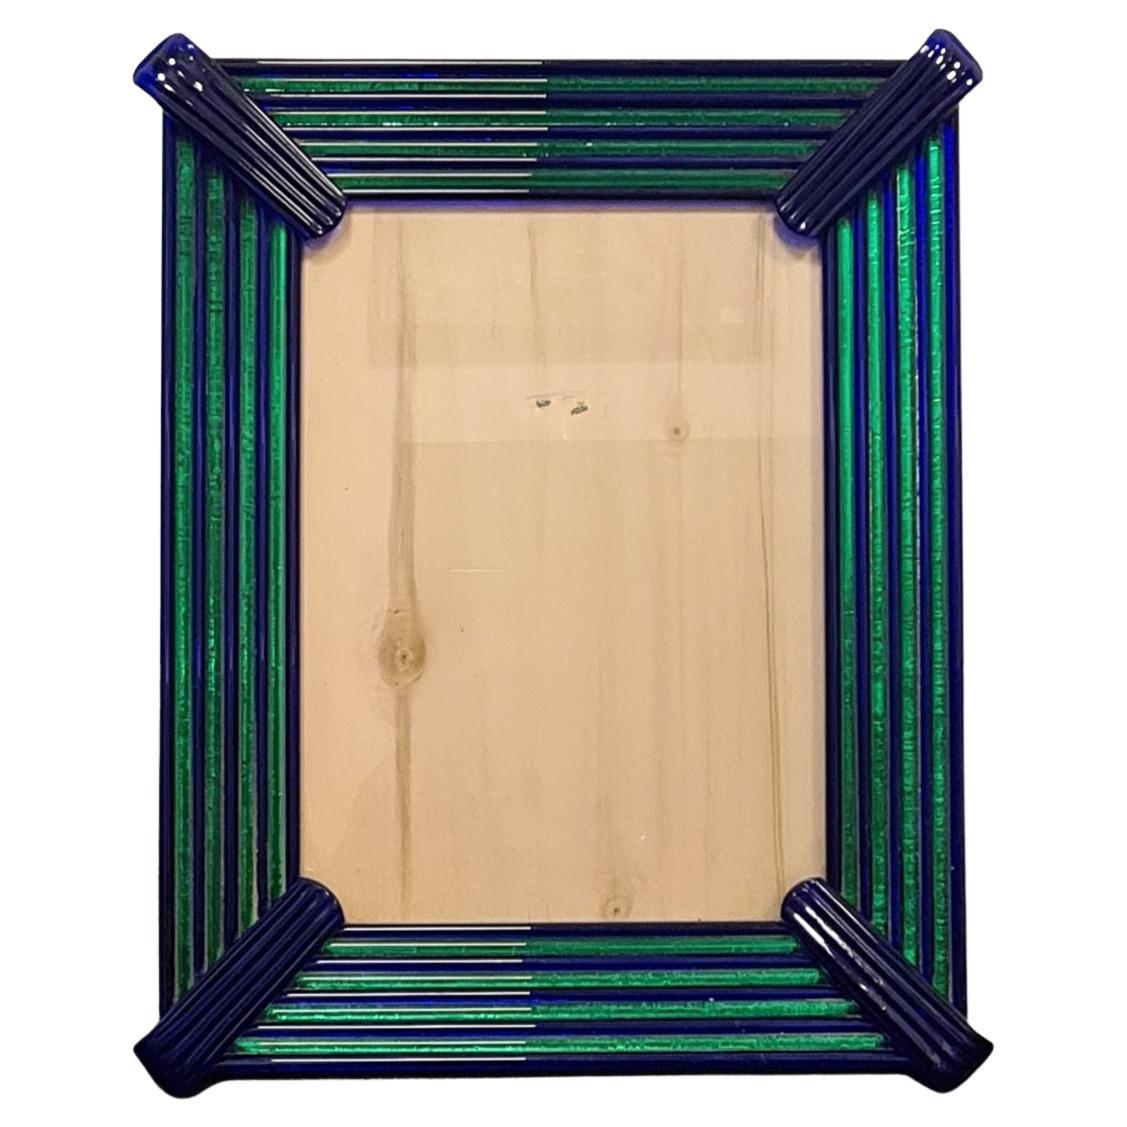 Glass frame by Archimedes Seguso